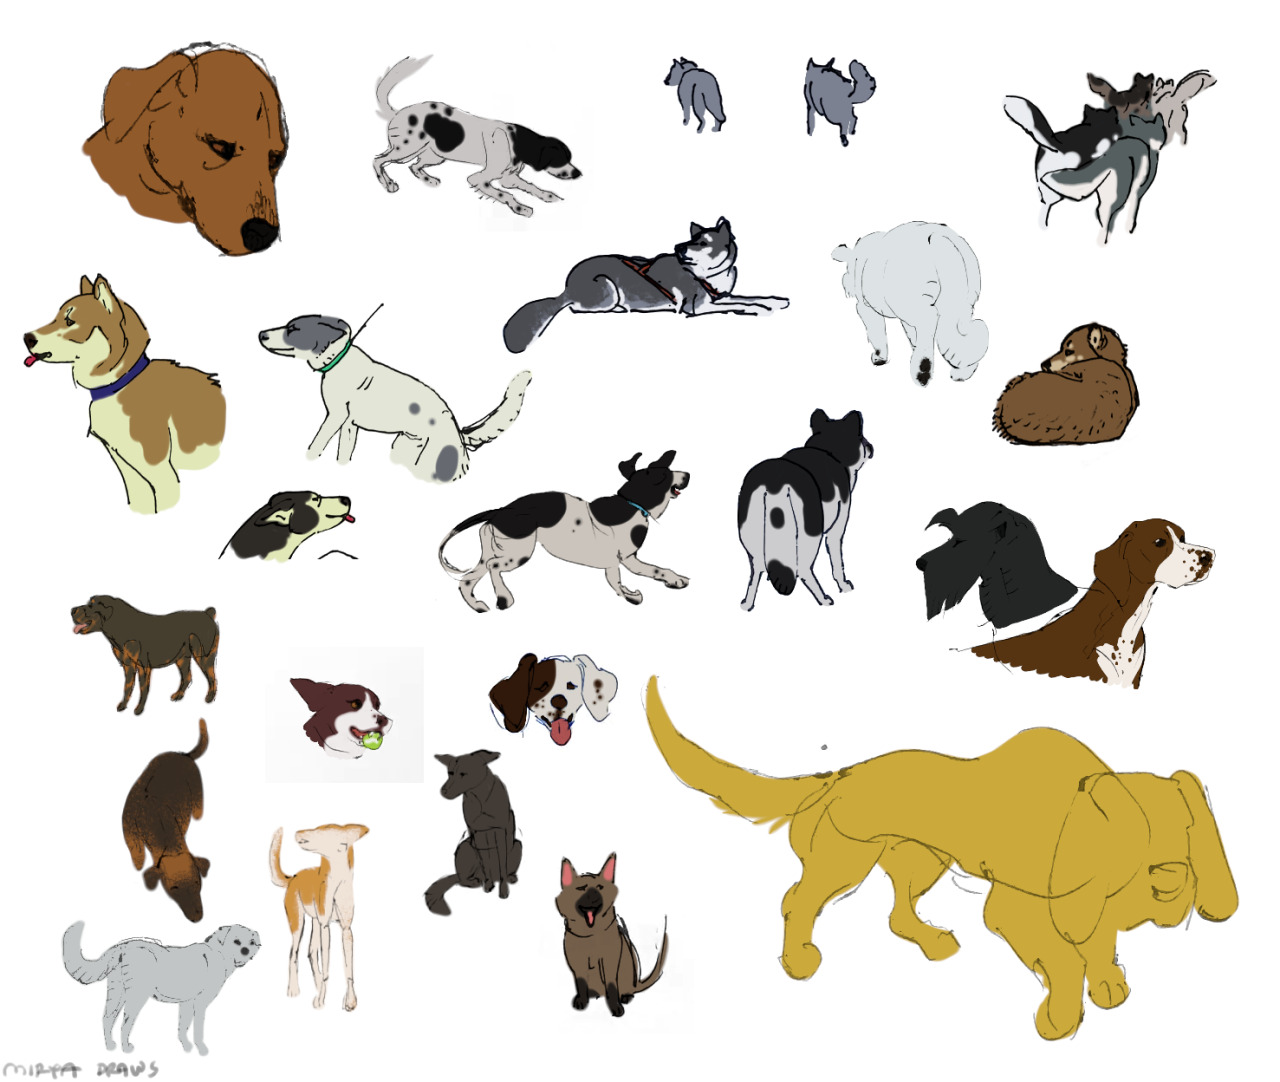 Last year I started doing “life” drawings of various dog breeds. I drew them without pausing the video. The videos I was watching were a Russian TV show about dogs called “planet of dogs” (Планета Собак). Took me a year to finish all the episodes. These are my favourite drawings from the series, coloured. #animals and nature #life drawing #life drawing from video #dog #Canis lupus familiaris #doggos#dog breeds #remote life drawing